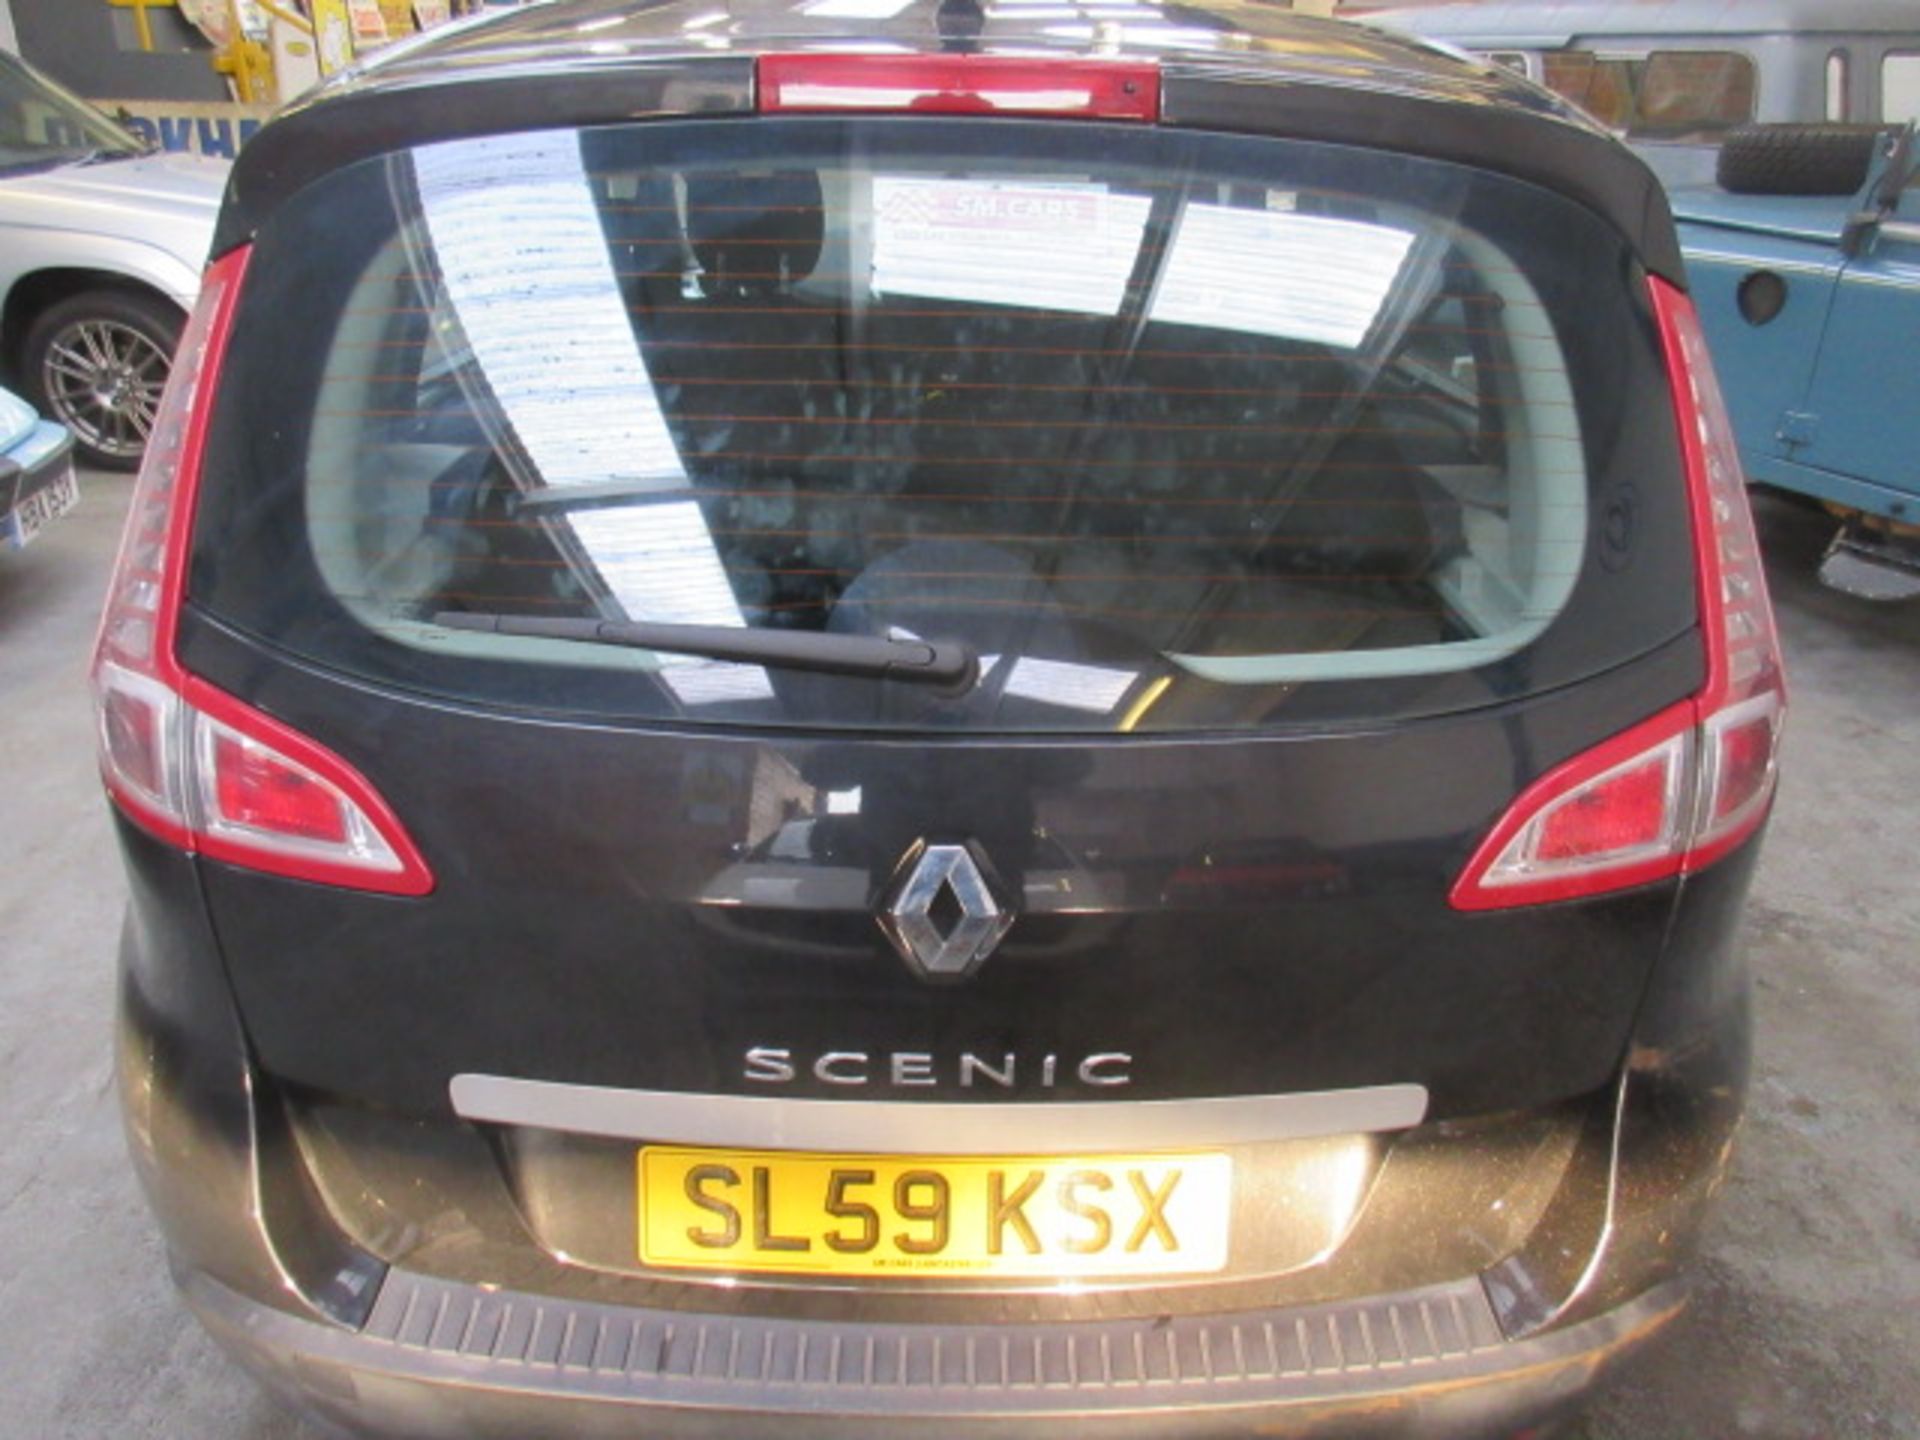 59 09 Renault Scenic Dyn VVT - Image 16 of 24